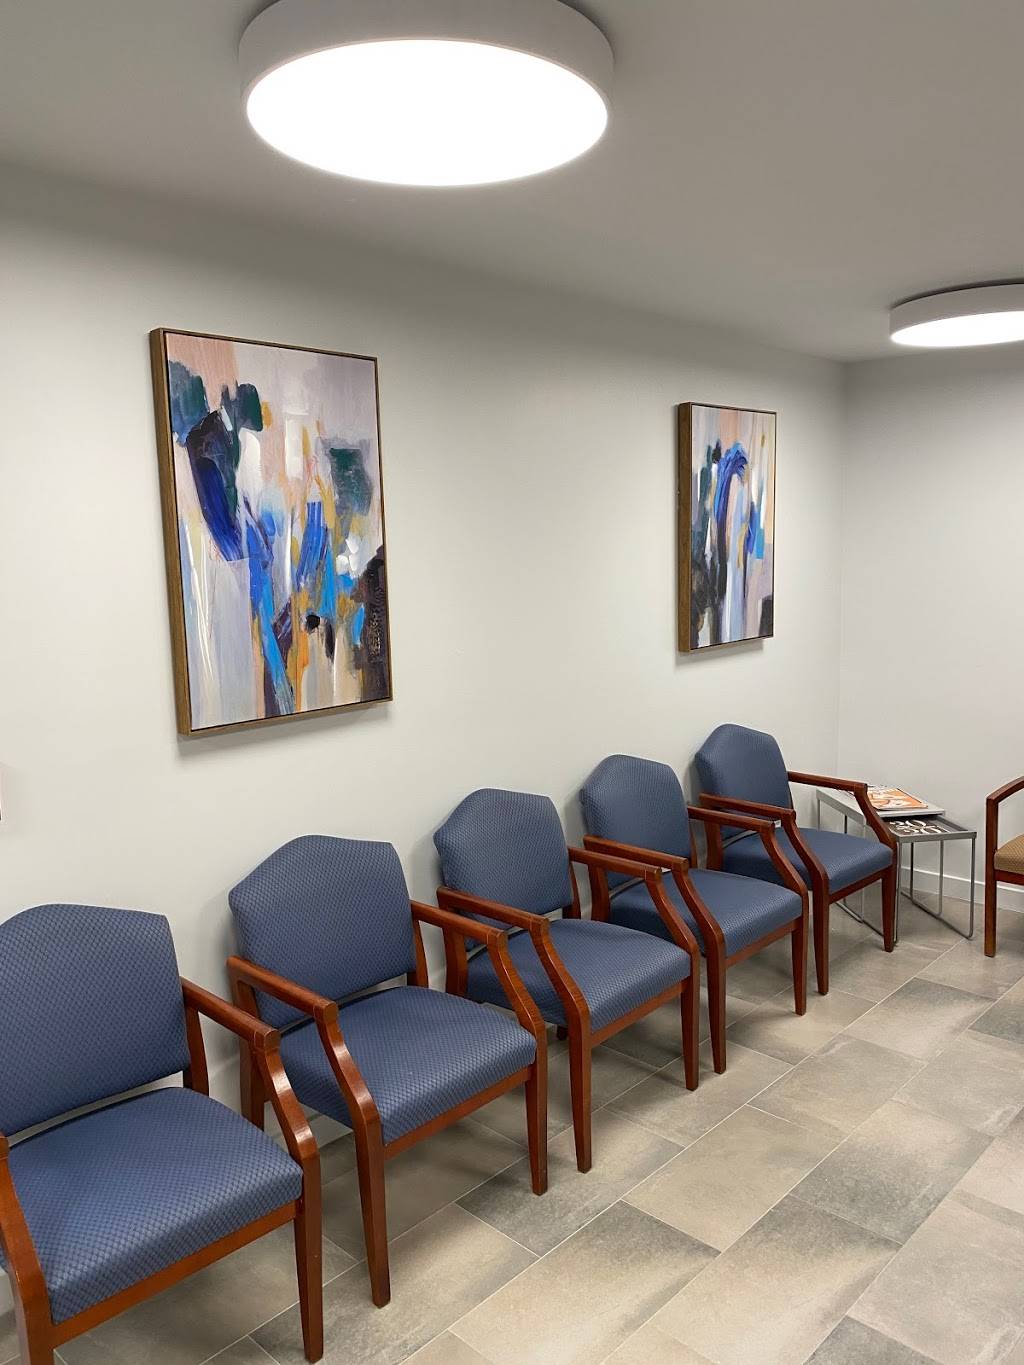 Premier Oral Surgery Group of Bergenfield | 375 S Washington Ave, Bergenfield, NJ 07621 | Phone: (201) 385-0775